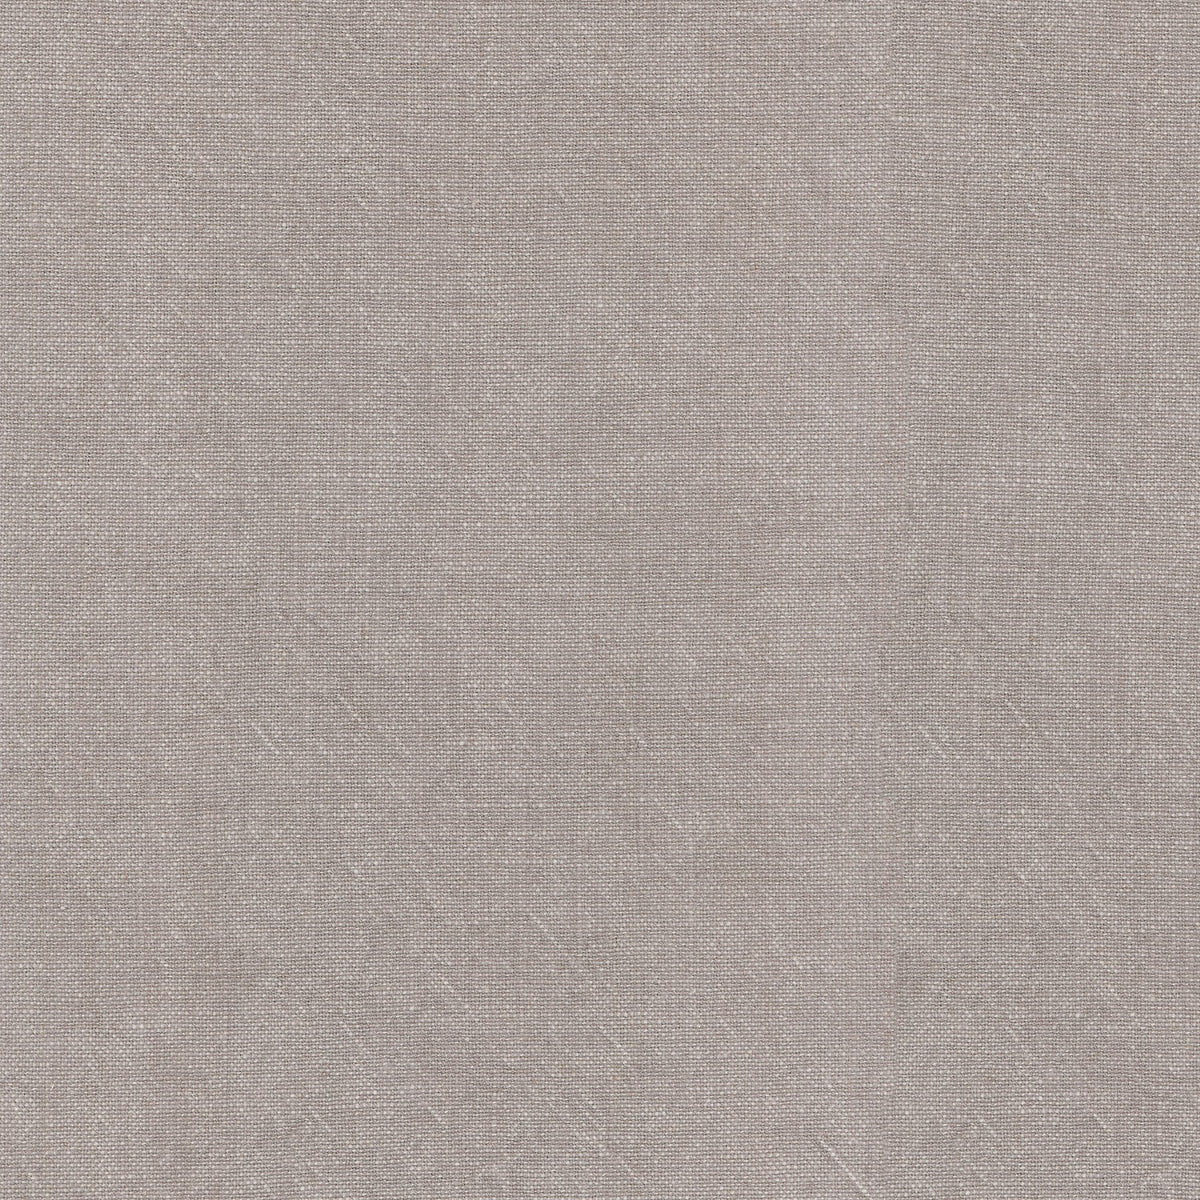 Ellen Degeneres - Cleary Pewter 250443 Solid Upholstery Fabric